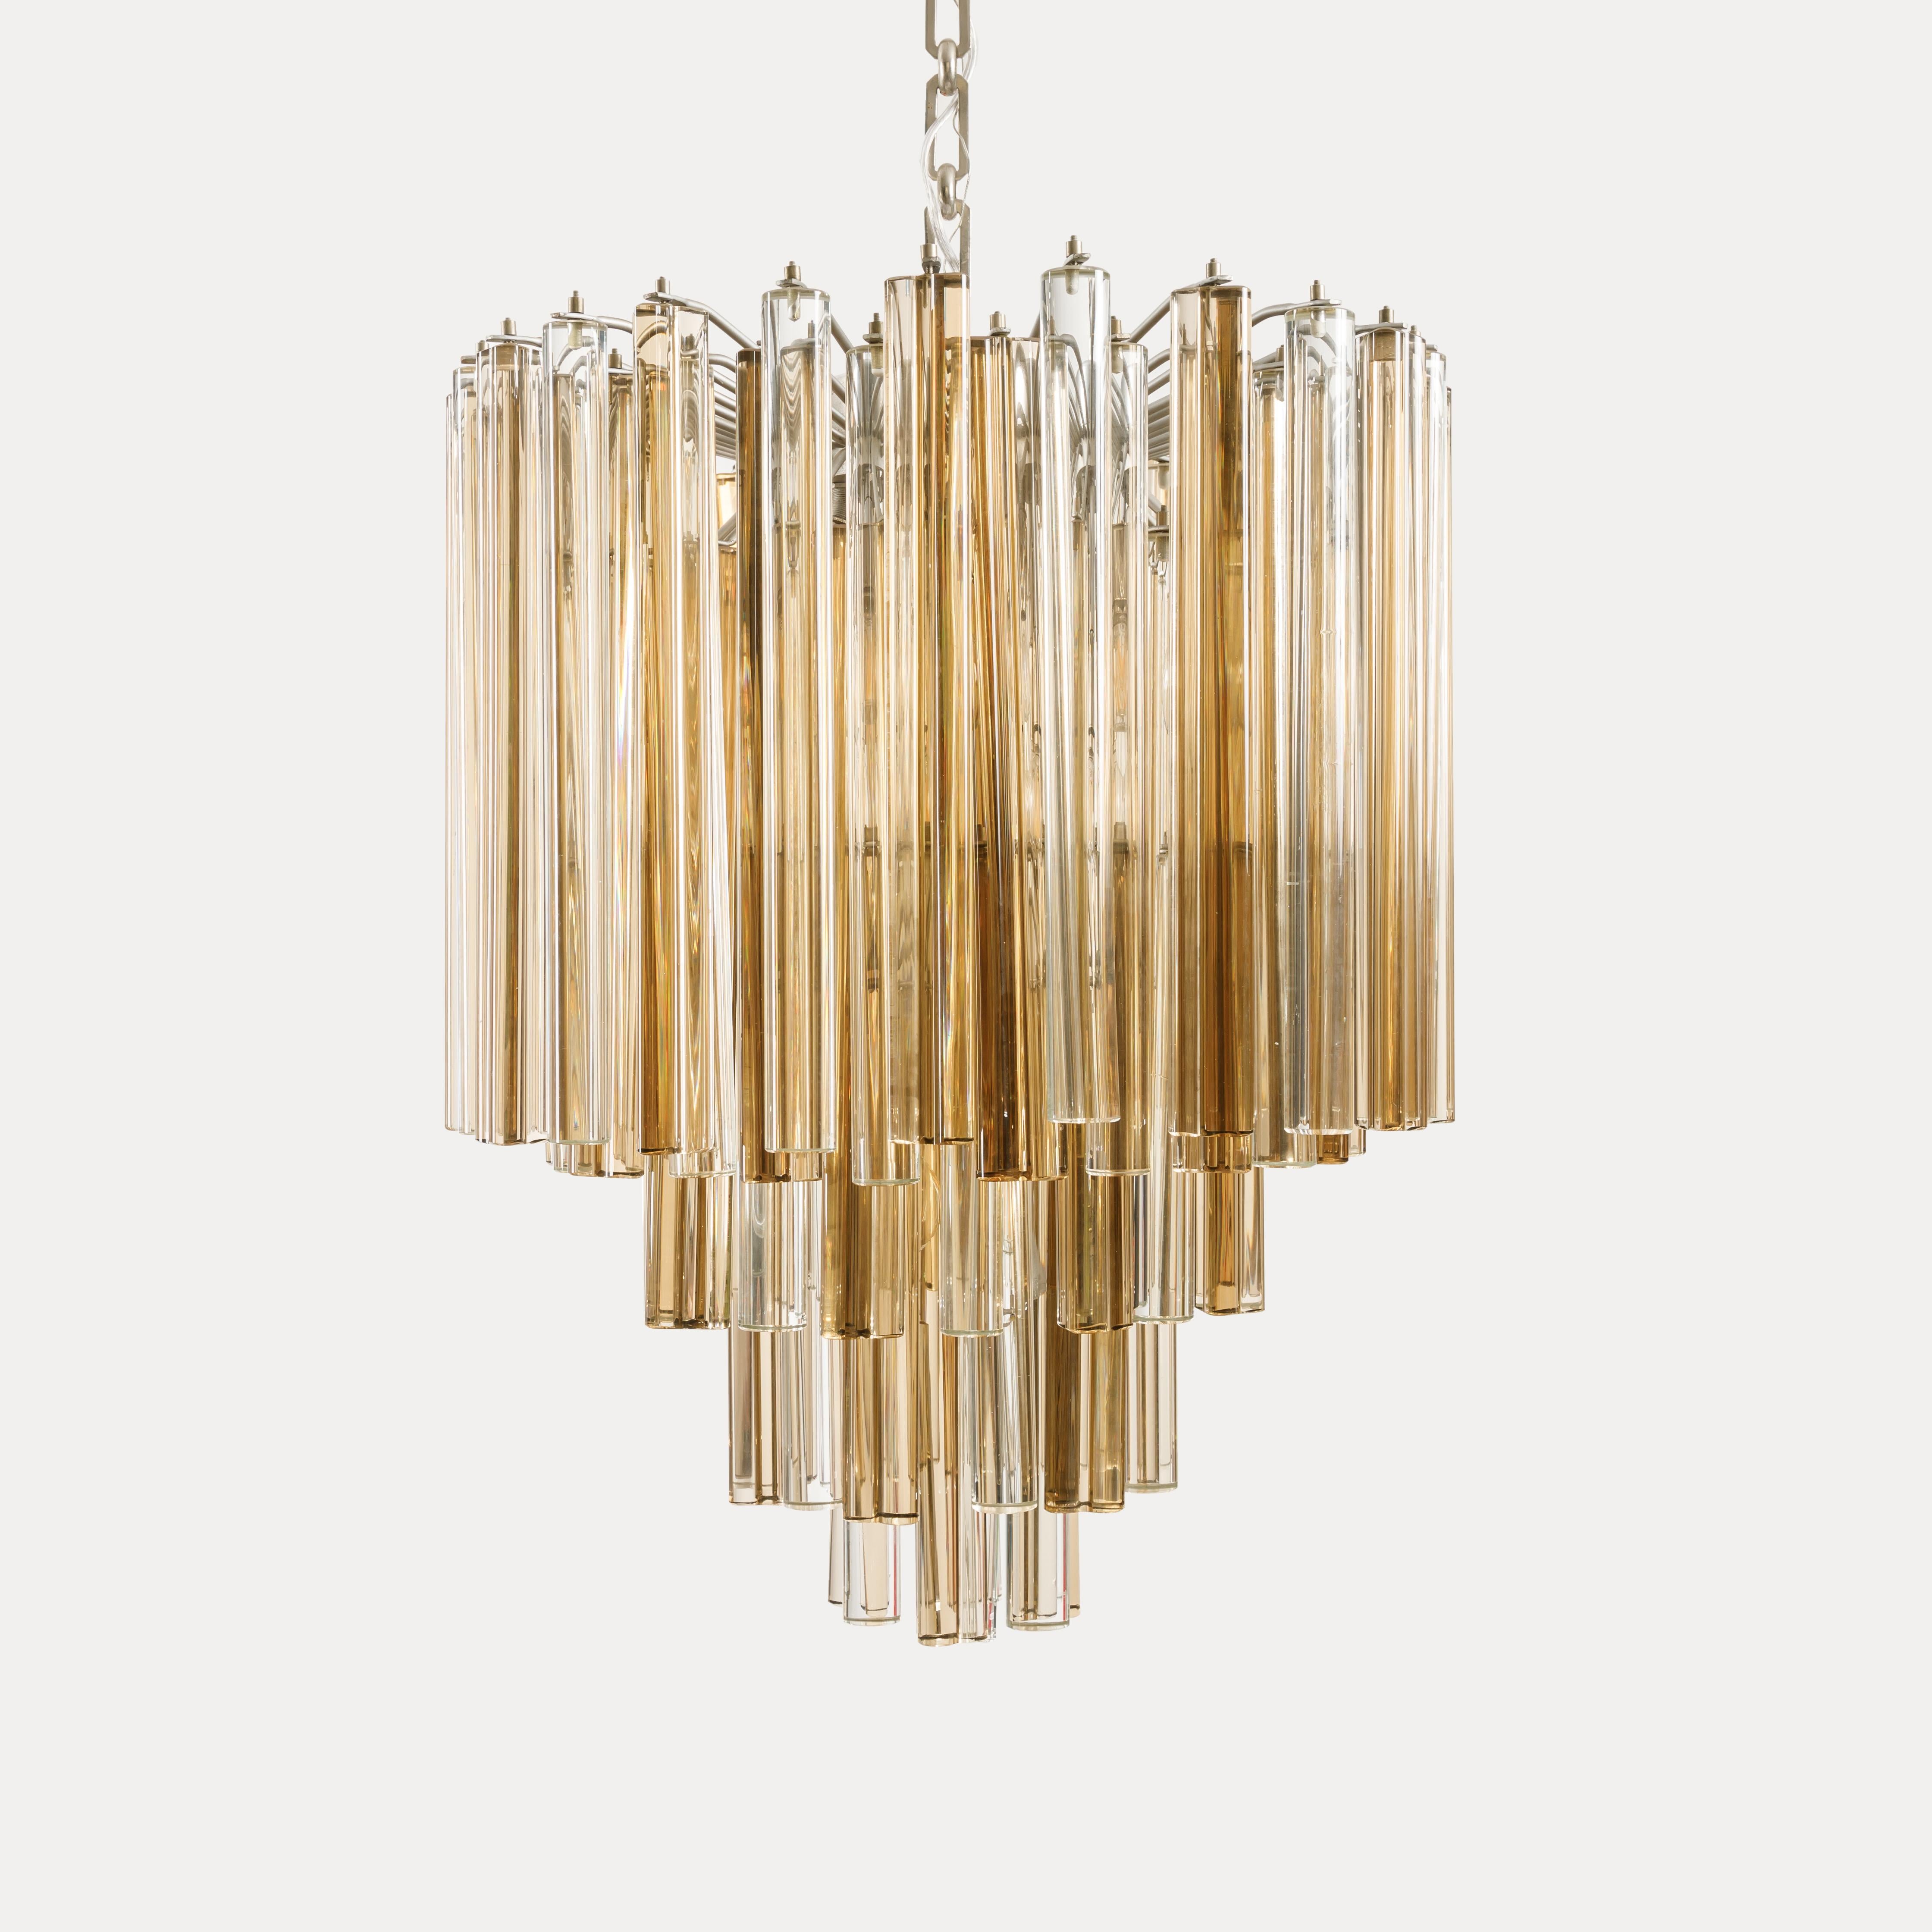 Exquisite Italian original 1960s Venini five-tiered chandelier from the 'Trilobo' series with 85 alternating crystal elements of amber and clear color in different sizes and suspended from a metal structure and canopy.  The blown glass from the